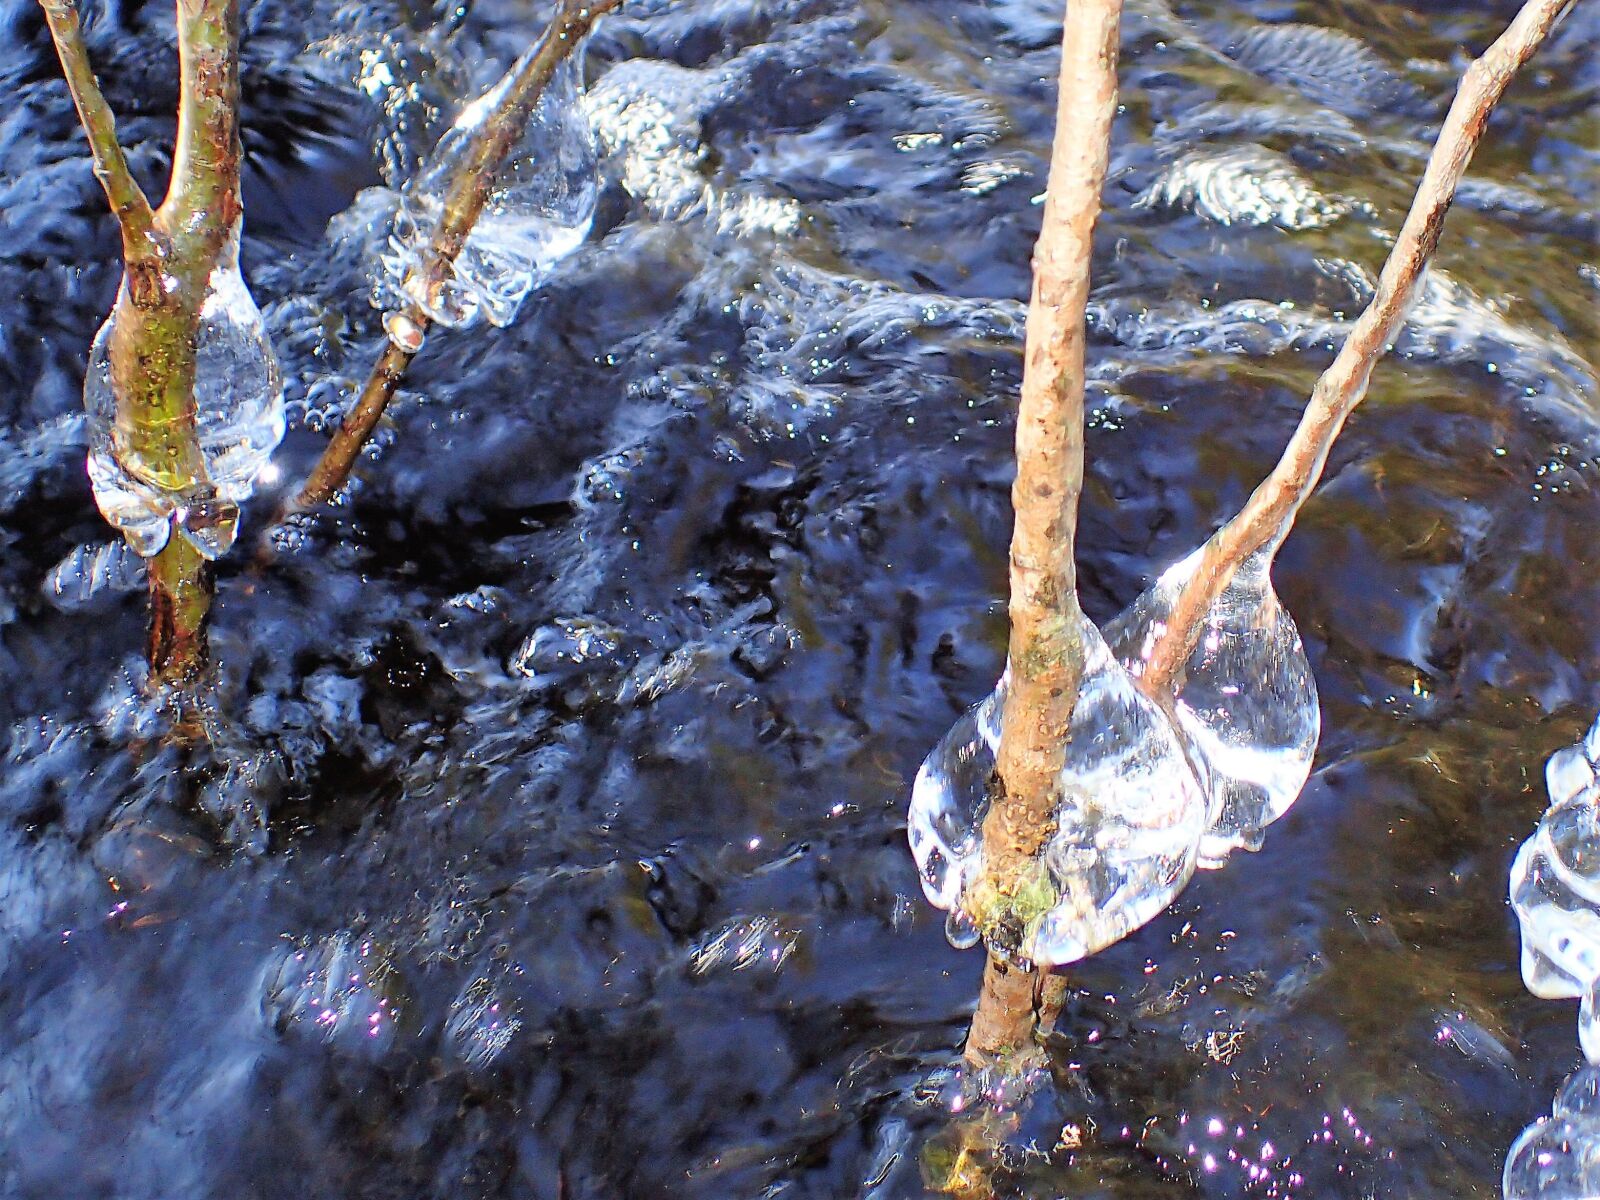 Olympus TG-4 sample photo. Ice, water, nature photography